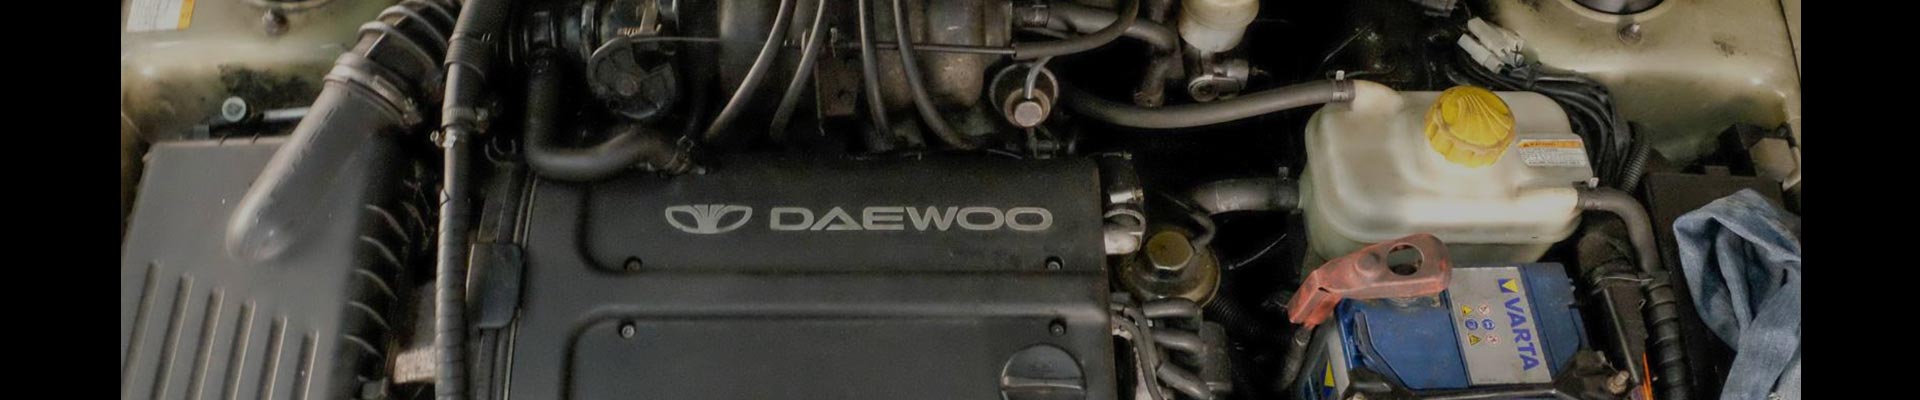 Shop Replacement 2000 Daewoo Leganza Parts with Discounted Price on the Net